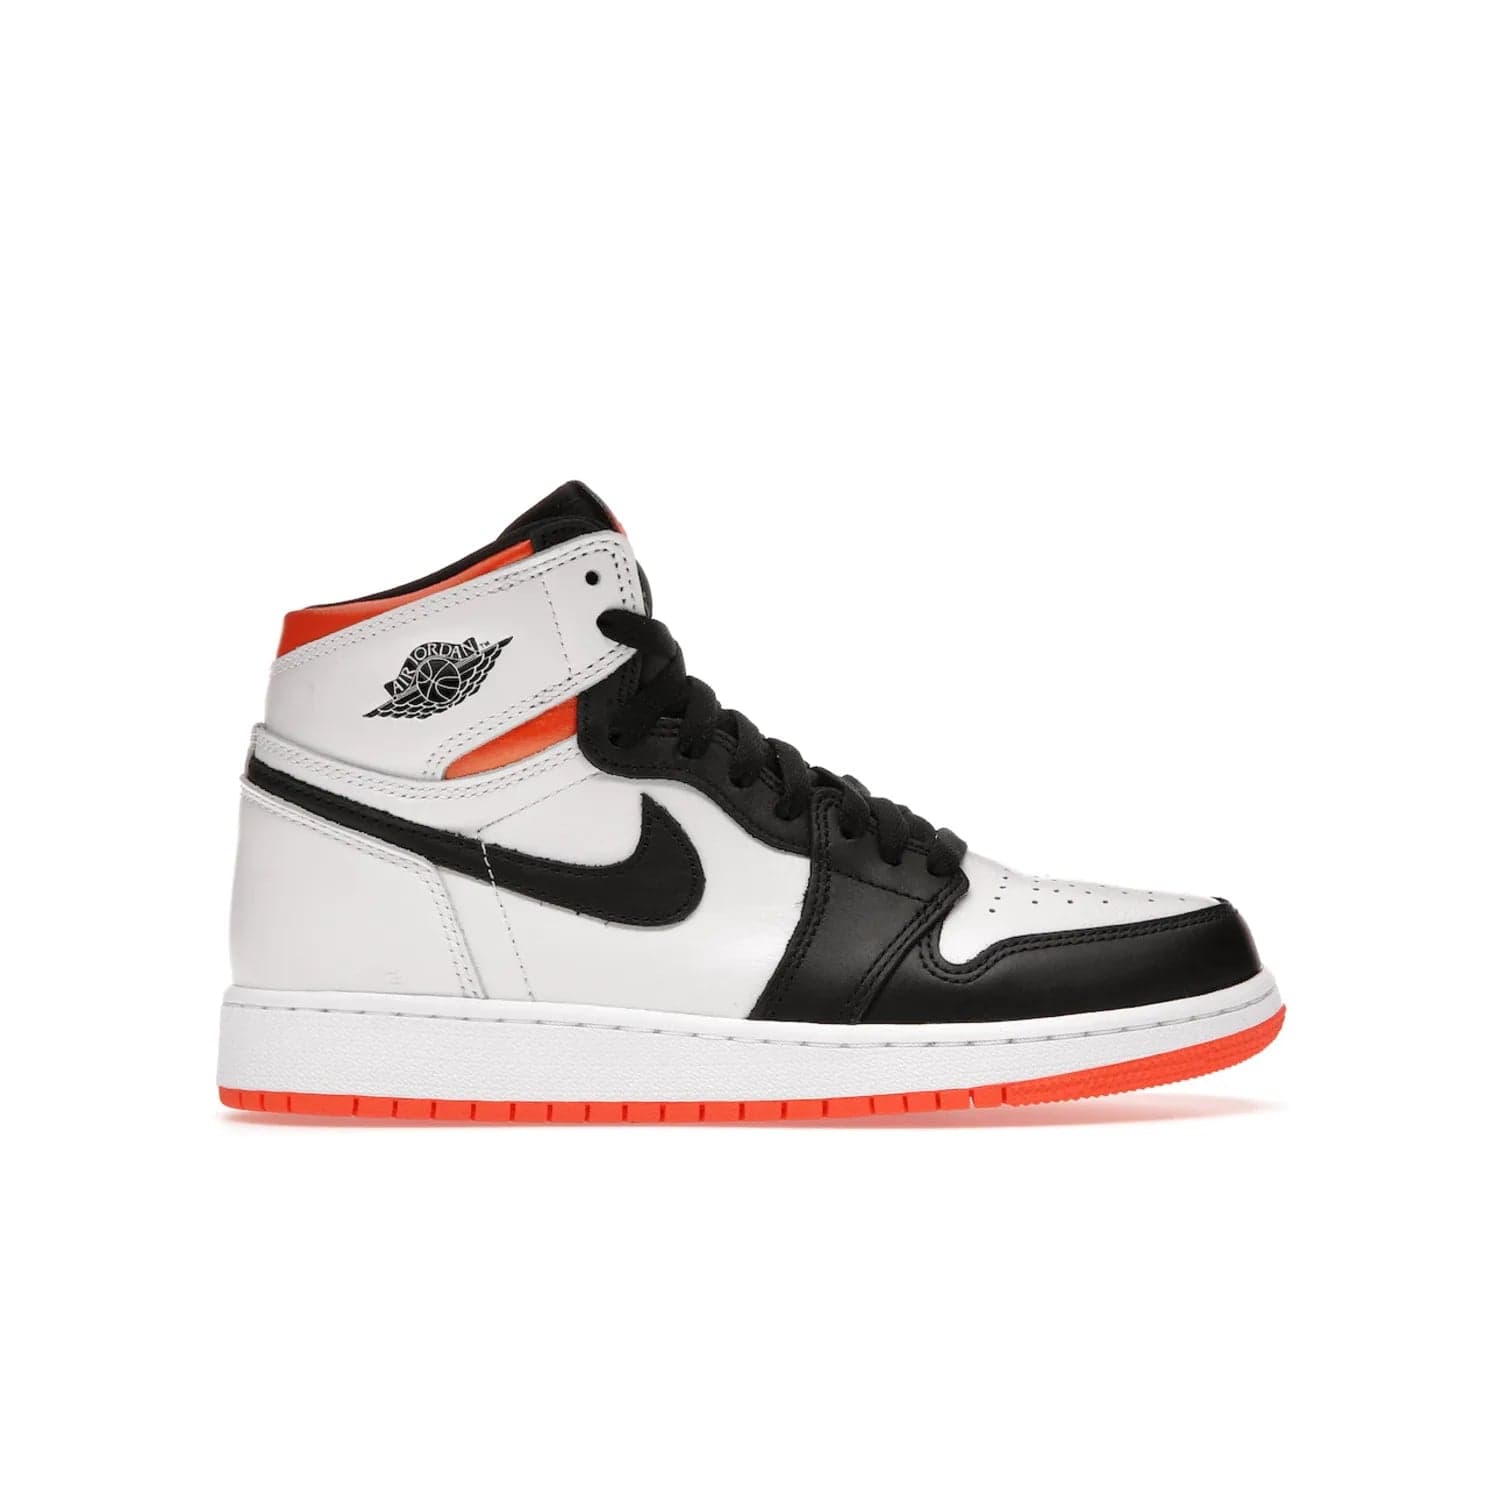 Jordan 1 High OG Electro Orange (GS) - Image 1 - Only at www.BallersClubKickz.com - The Air Jordan 1 High OG Electro Orange GS is the ideal shoe for kids on the go. Featuring white leather uppers, black overlays, and bright orange accents, it's sure to become a favorite. A great mix of classic style and vibrant colors, the shoe delivers air cushioning for comfort and hard orange rubber for grip. Release on July 17th, 2021. Get them a pair today.